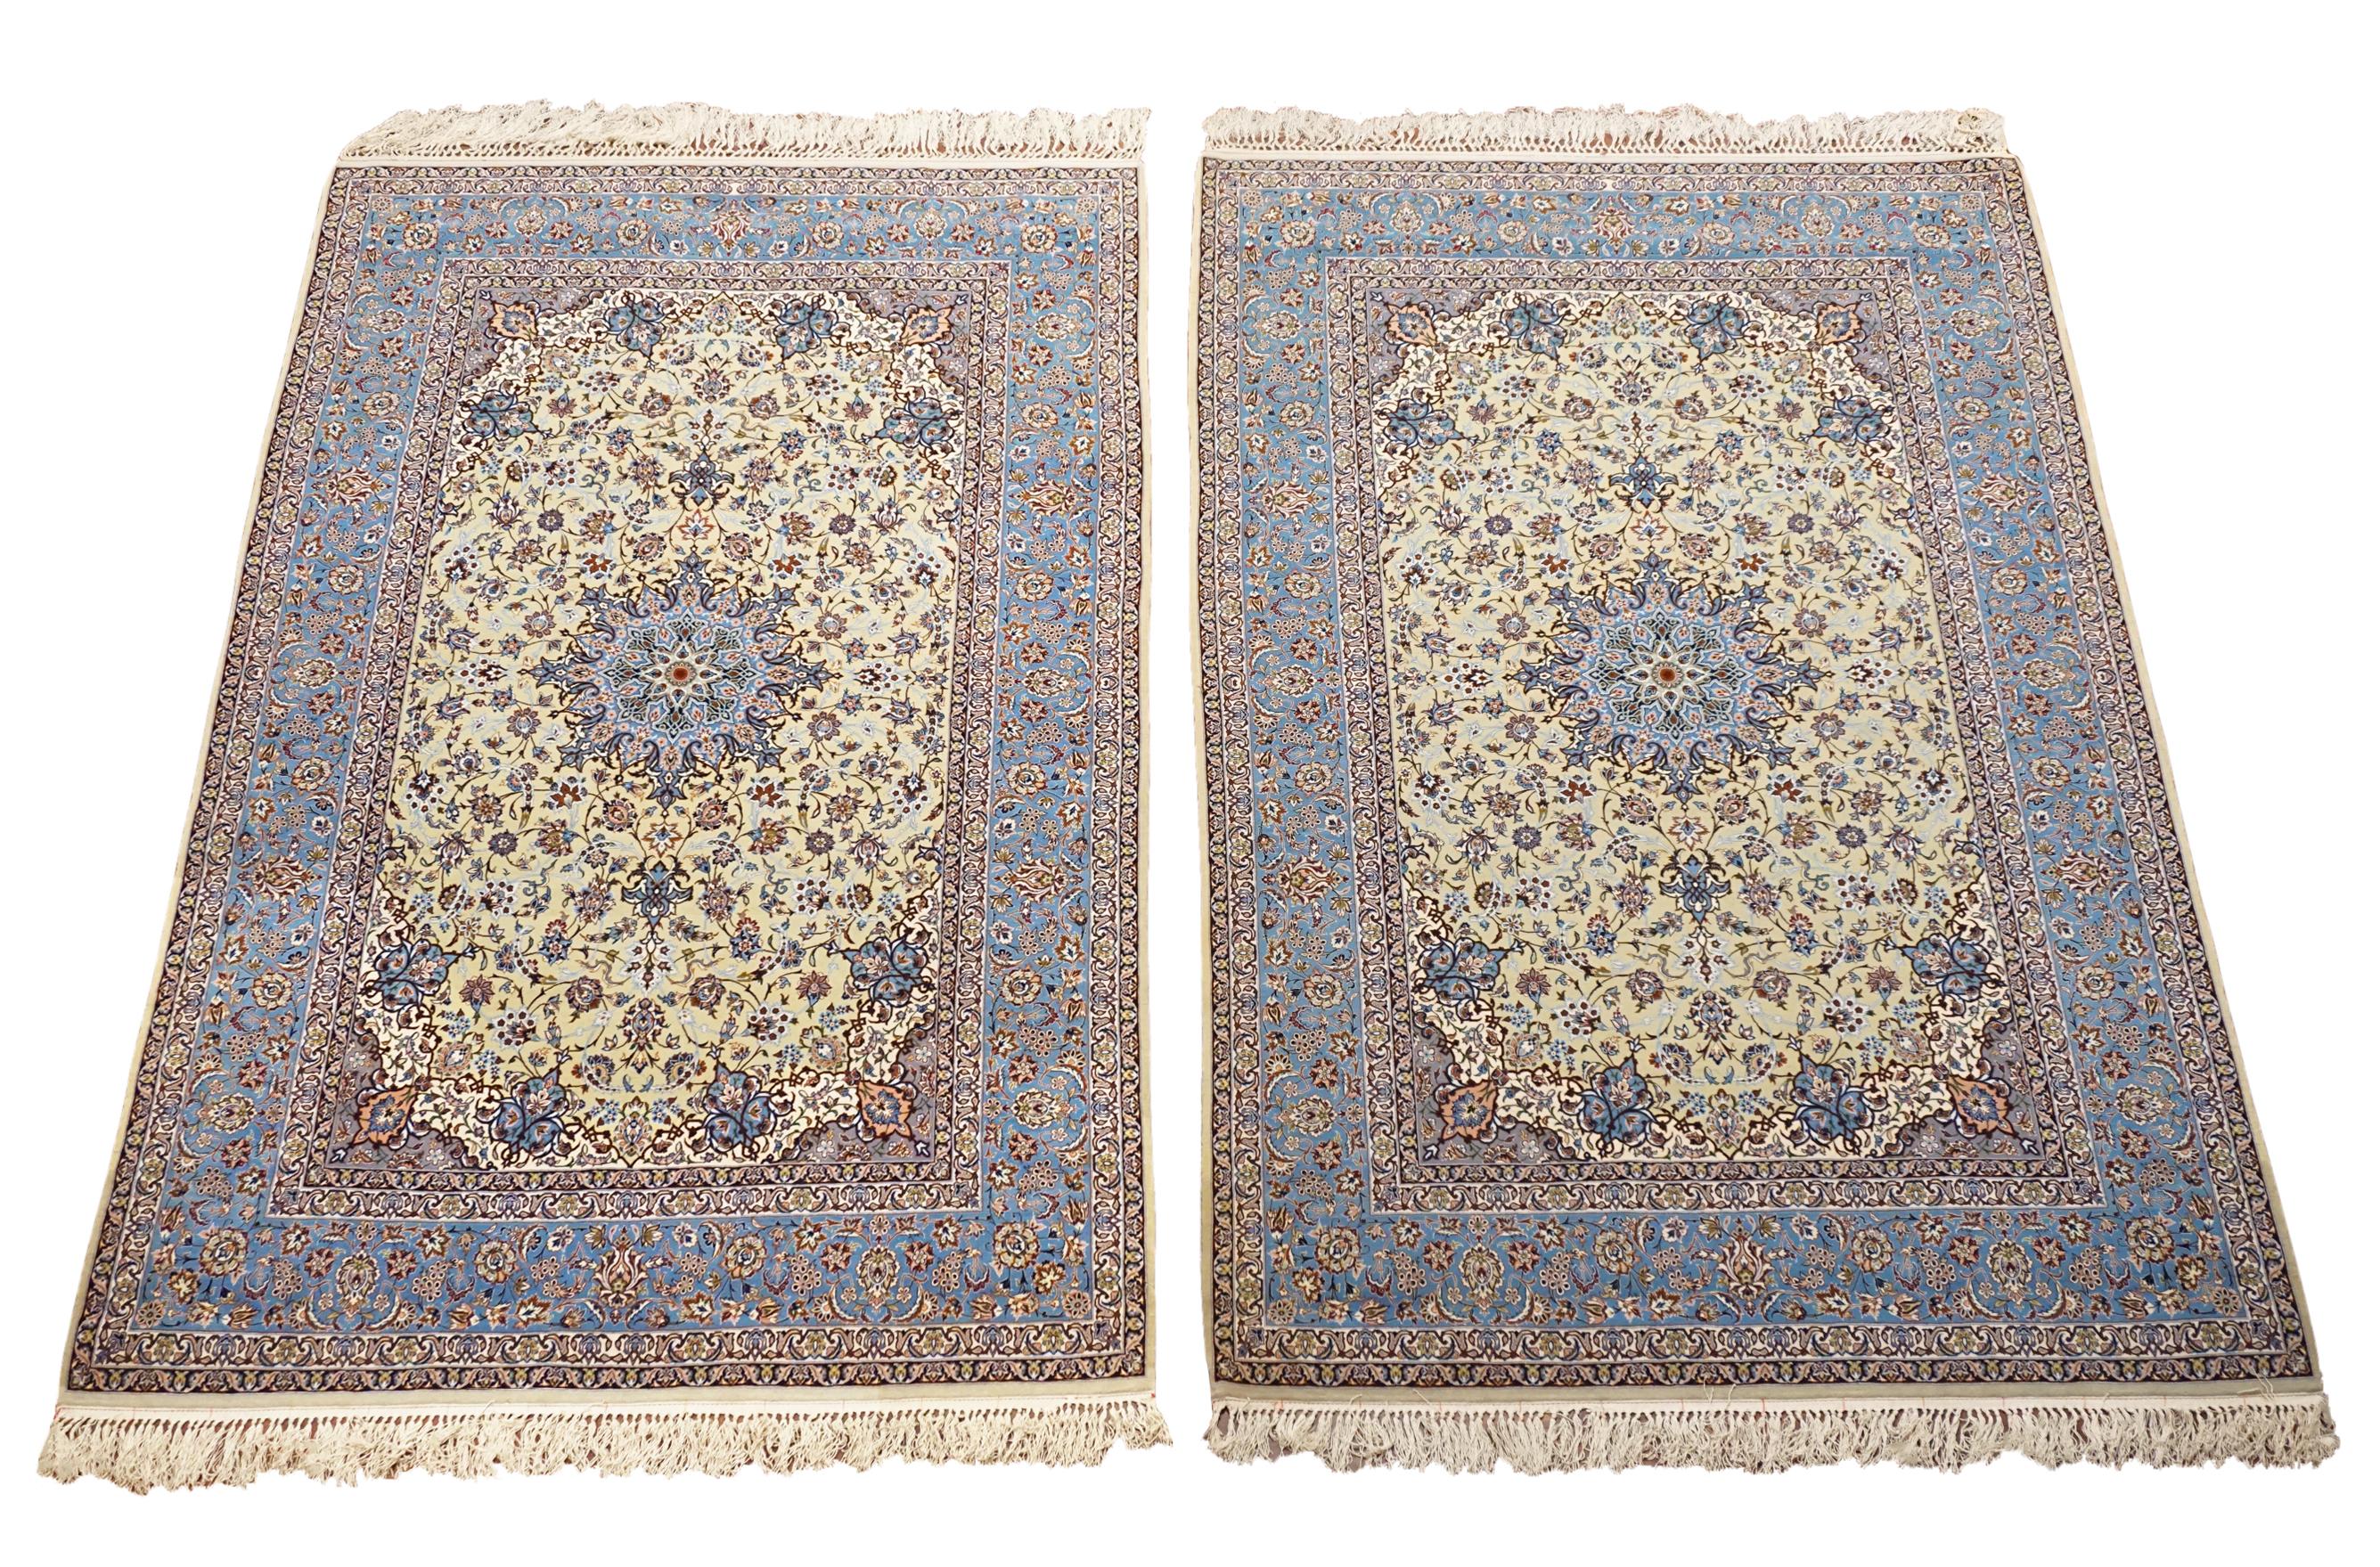 Set of two 

Hand-knotted wool & silk pile on a cotton foundation.

Circa 1970

Dimensions: 5' x 8' (Each) 

Origin: Iran

Field Color: Pale-Green  

Border Color: Blue 

Accent Colors: Navy-Blue, Ivory, Plum, Burgundy, Olive-Green 